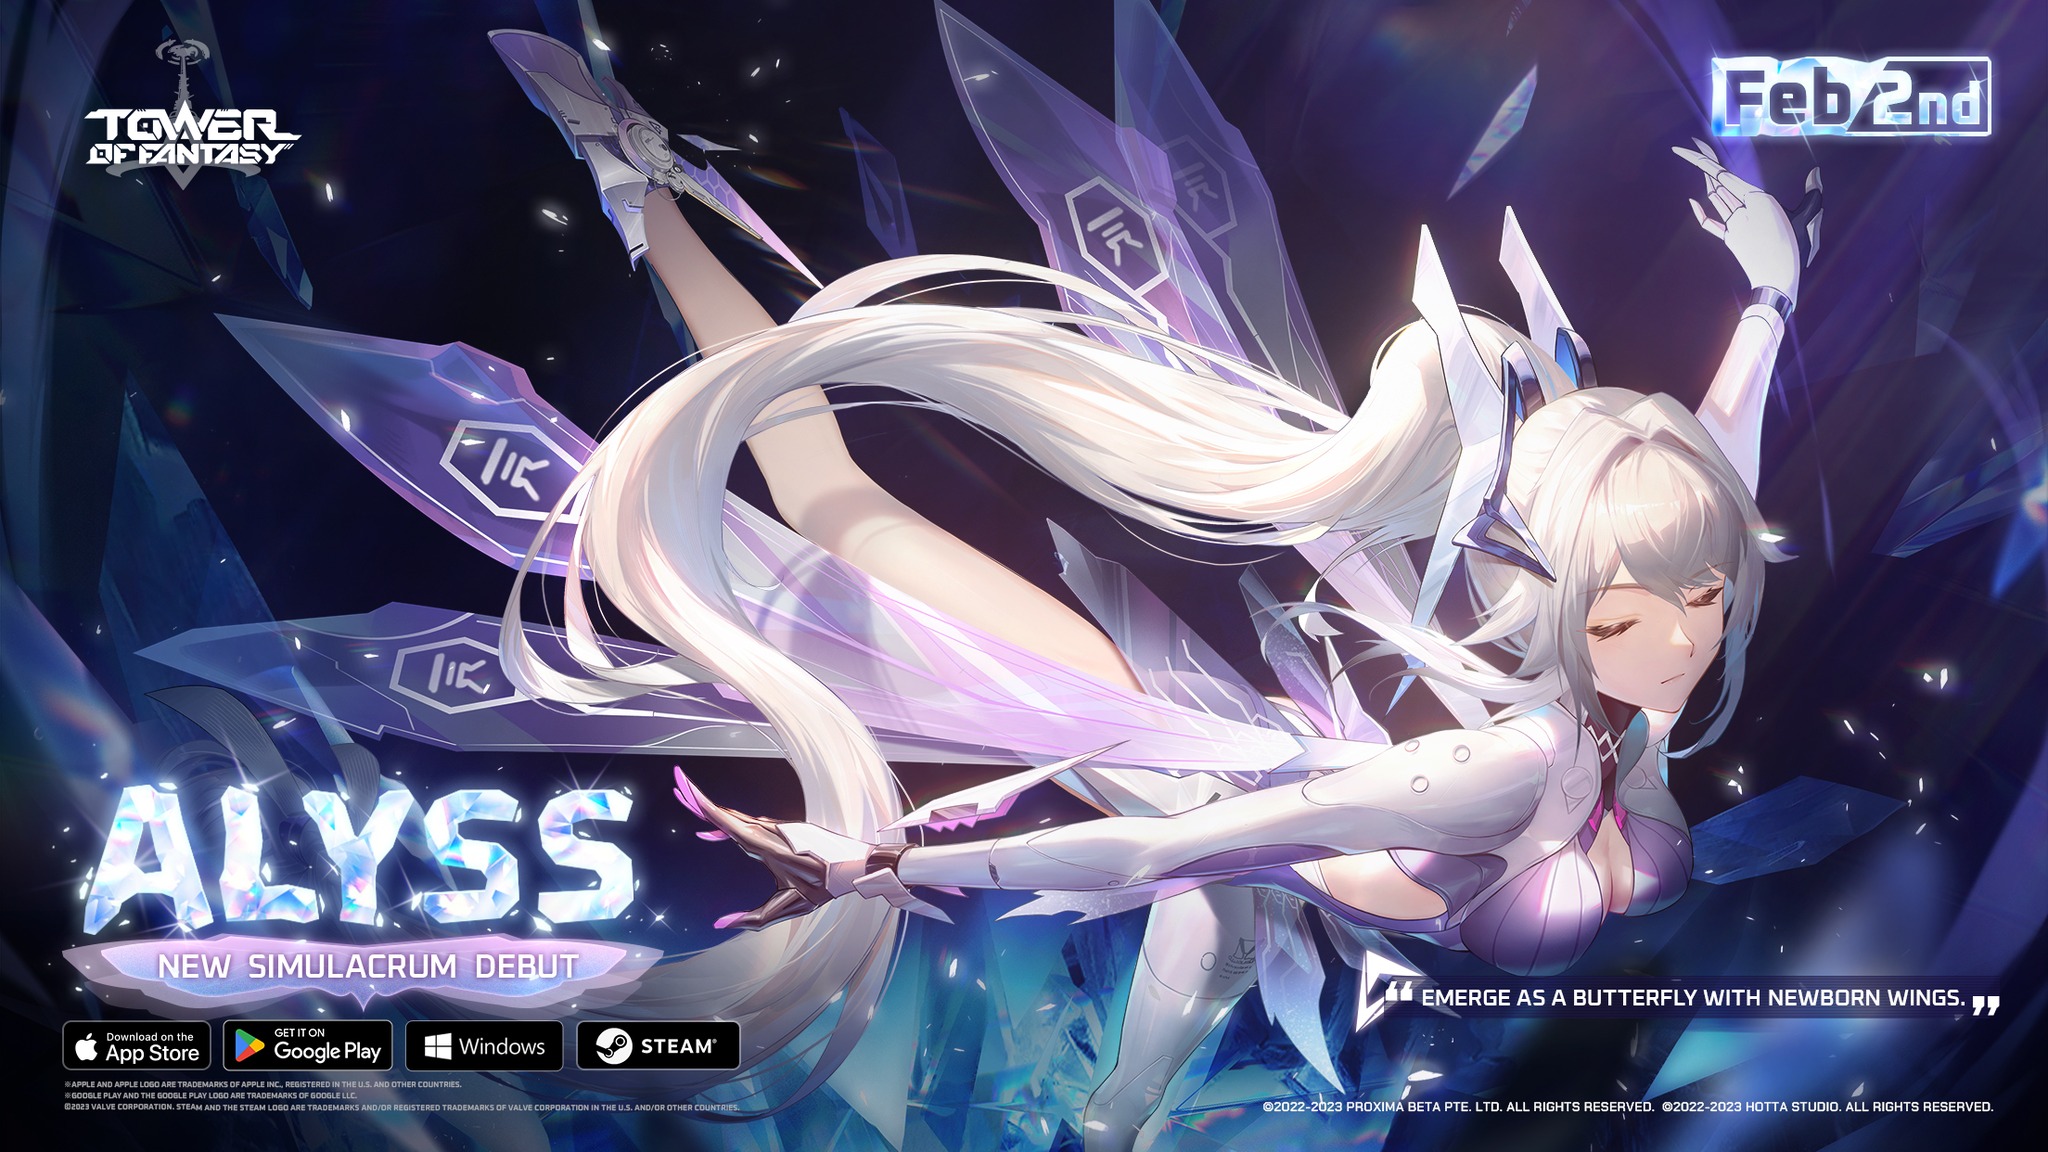 Tower of Fantasy reveals new character Alyss in V3.2 Update